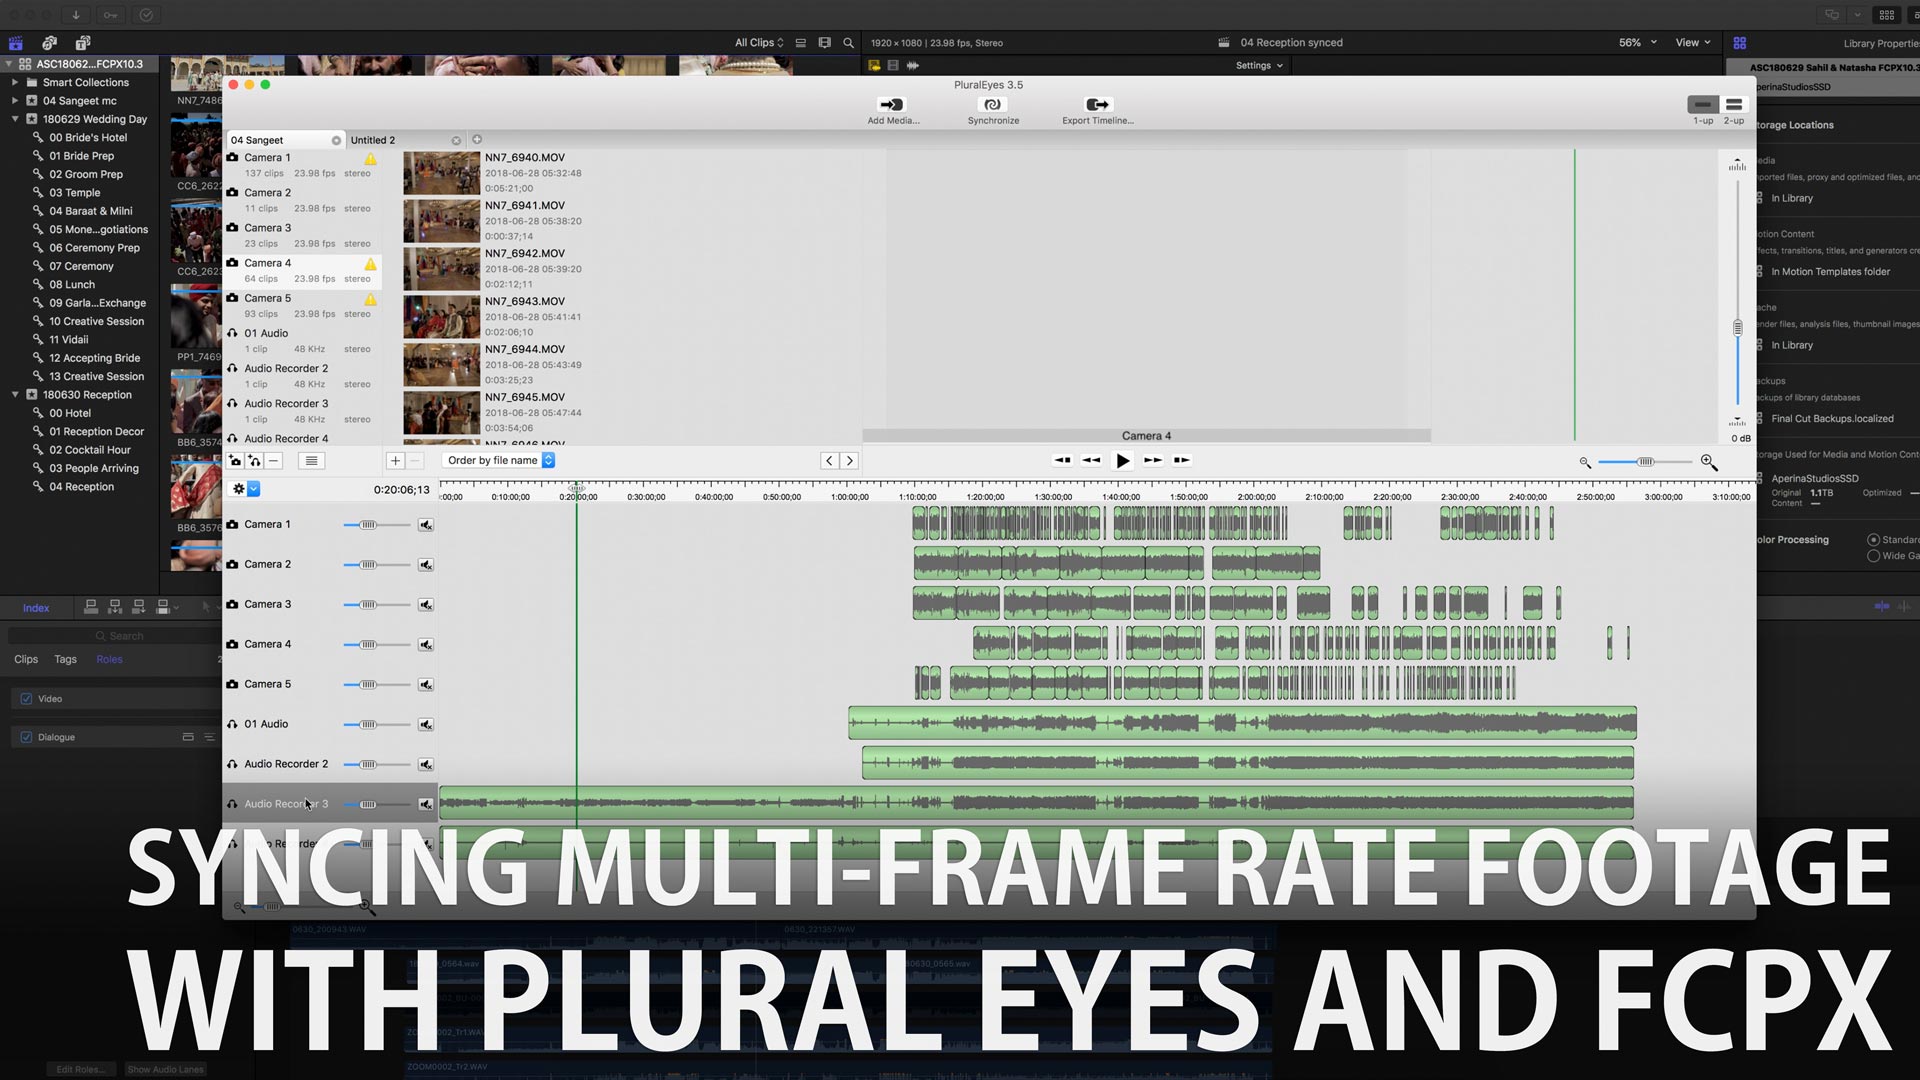 Tutorial on Syncing Multi-Frame Rate Footage (24p 30p & 60p) with Plural Eyes and Final Cut Pro X